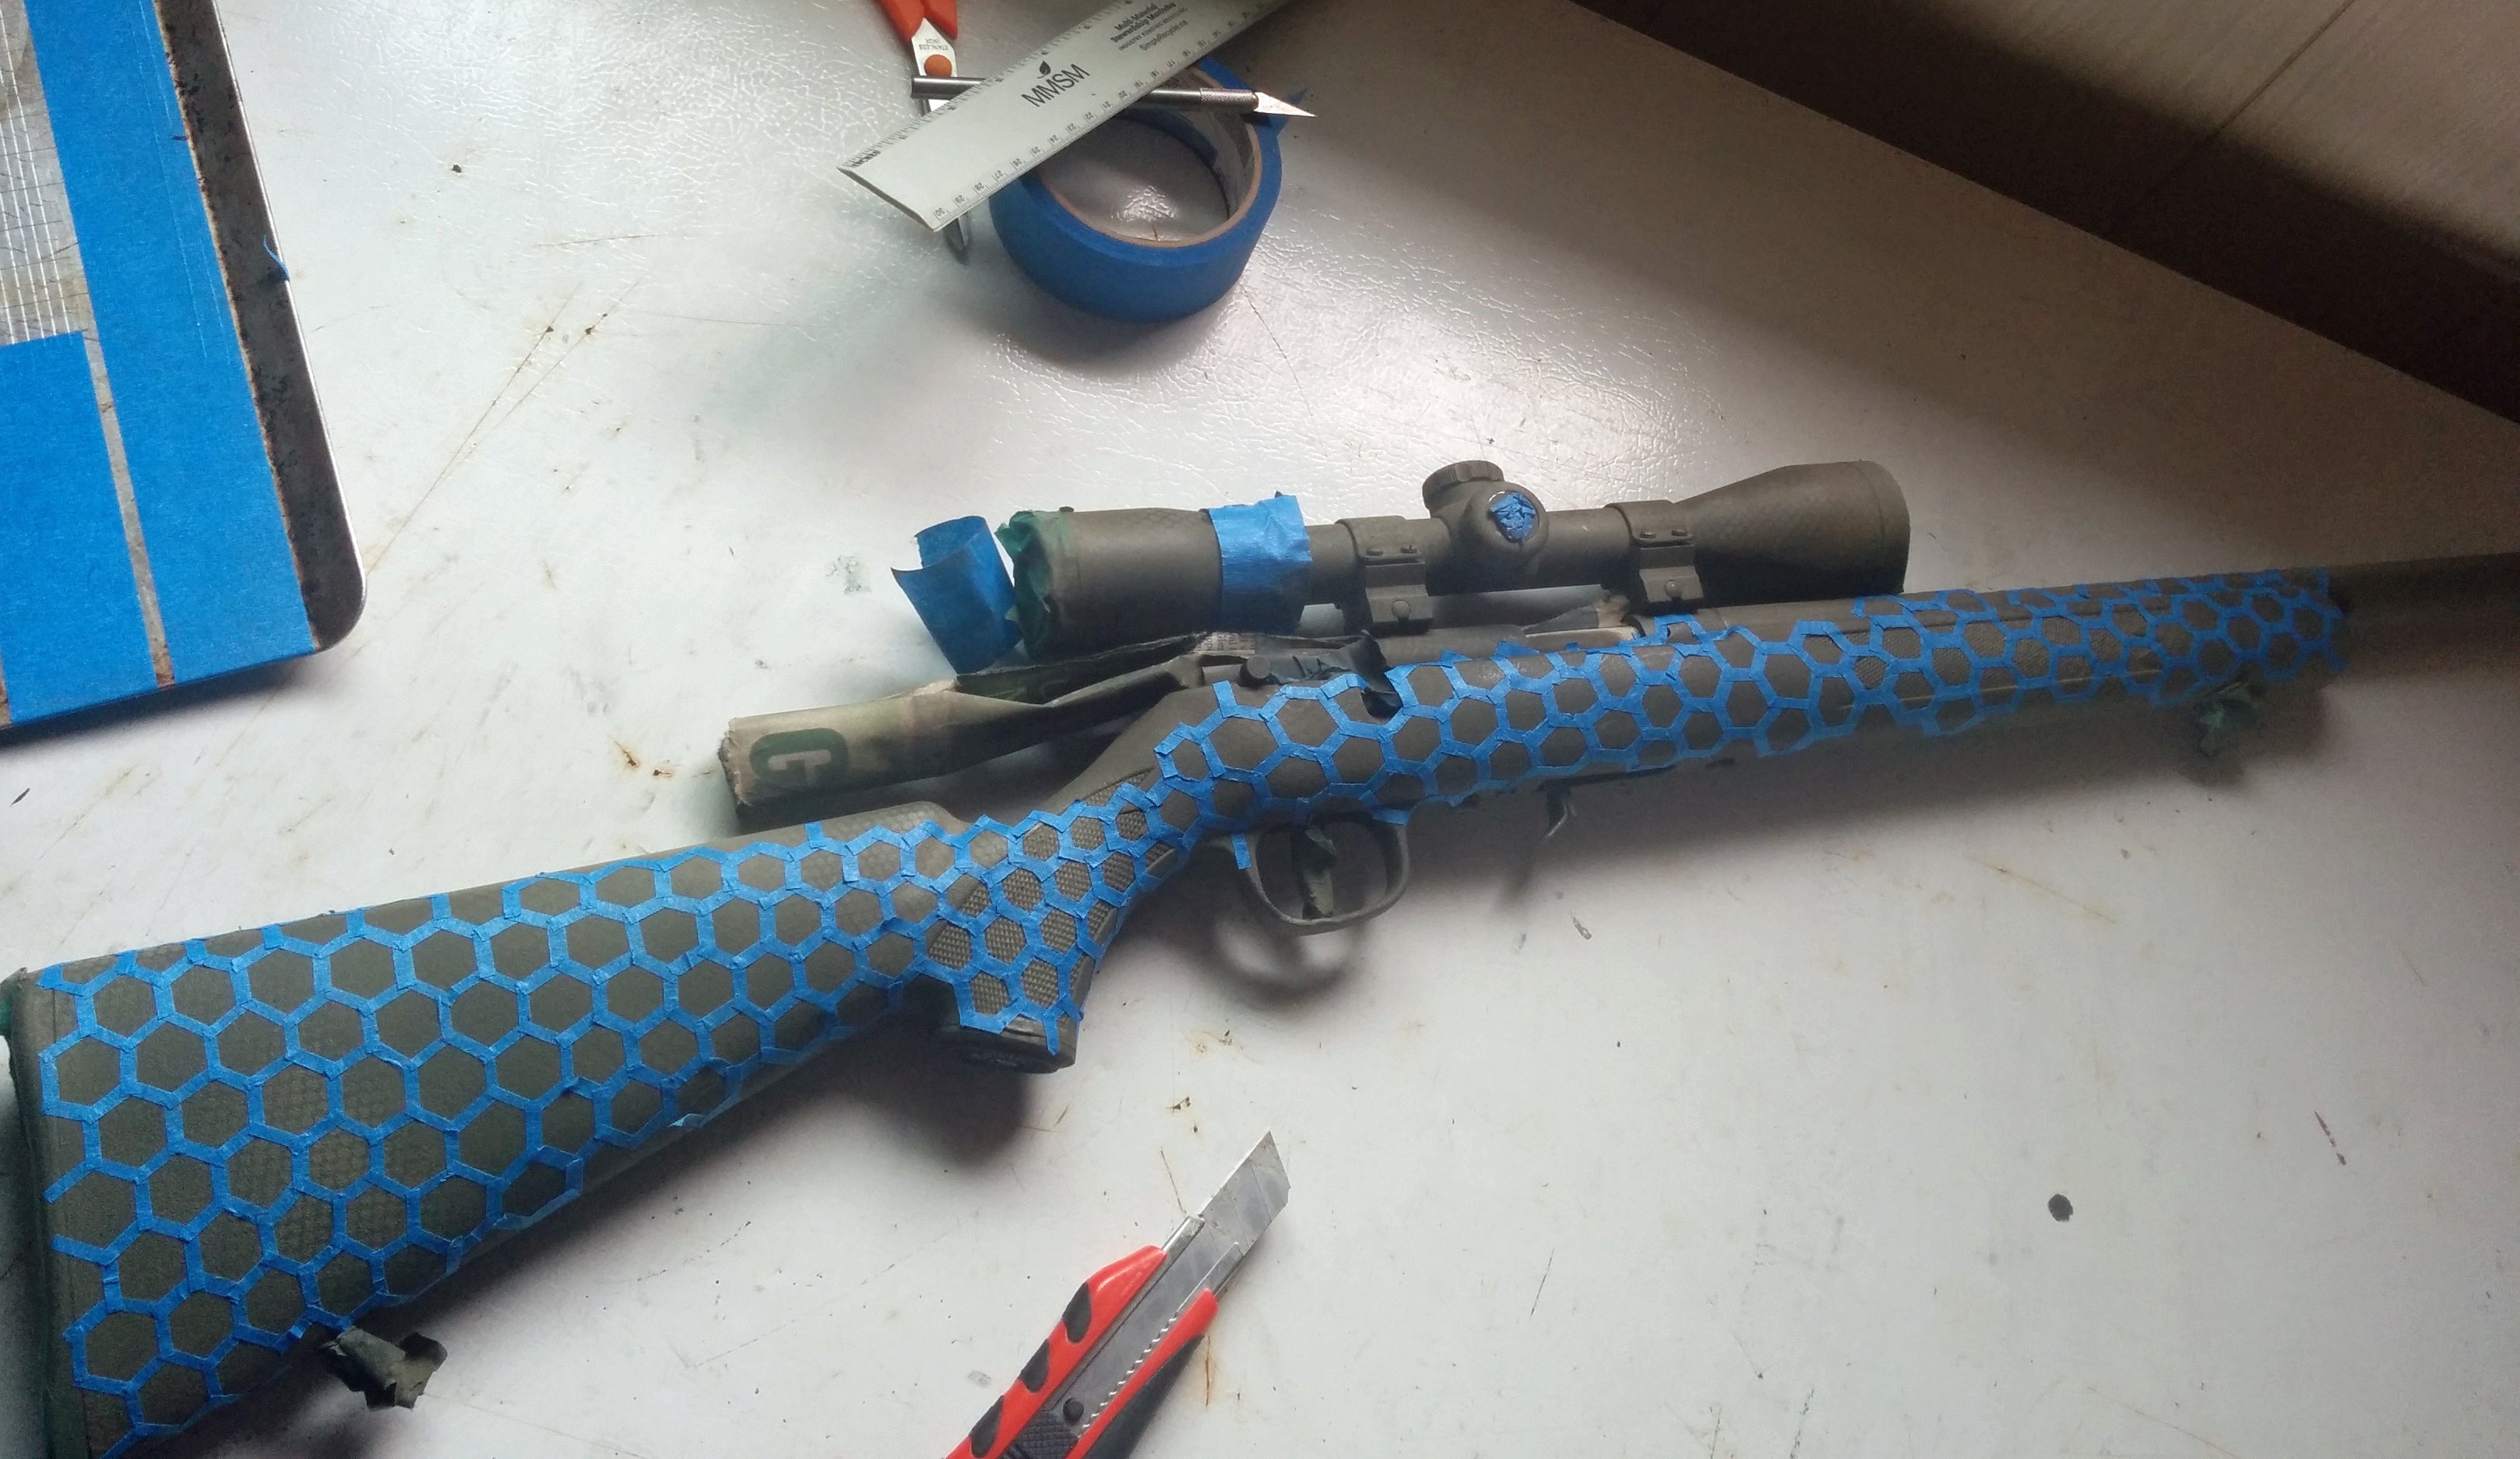 DIY Too Much Time on Your Hands? Paint Your Gun